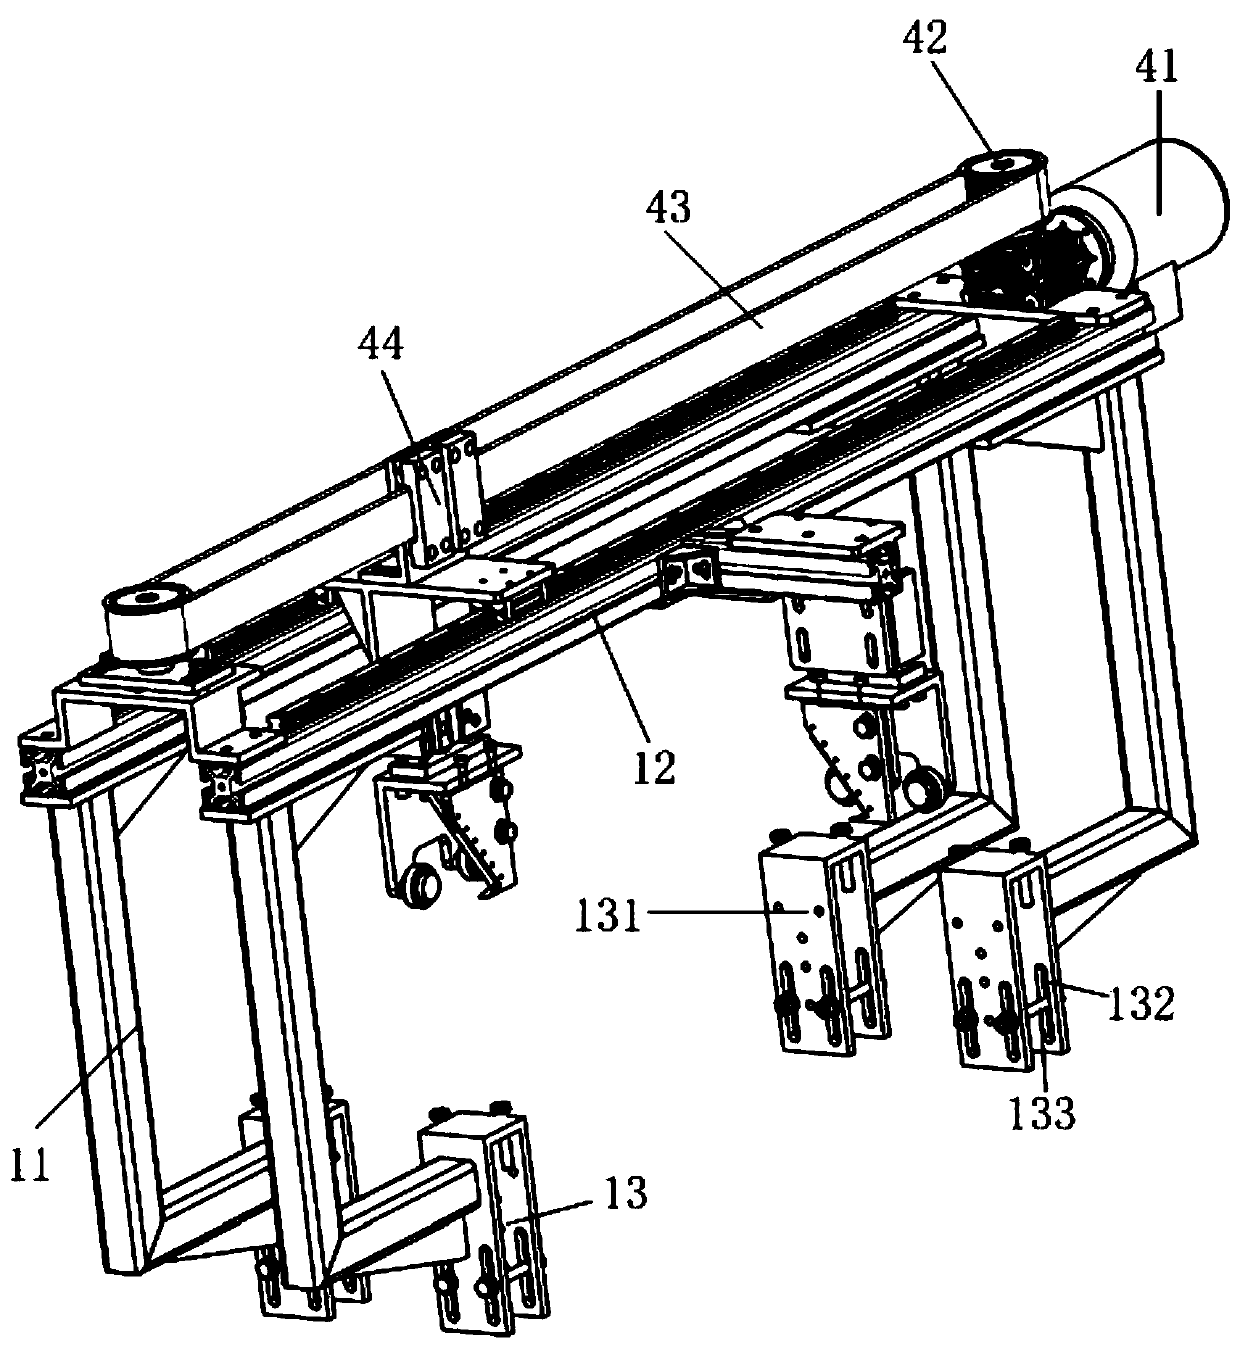 Strapping tape removing device